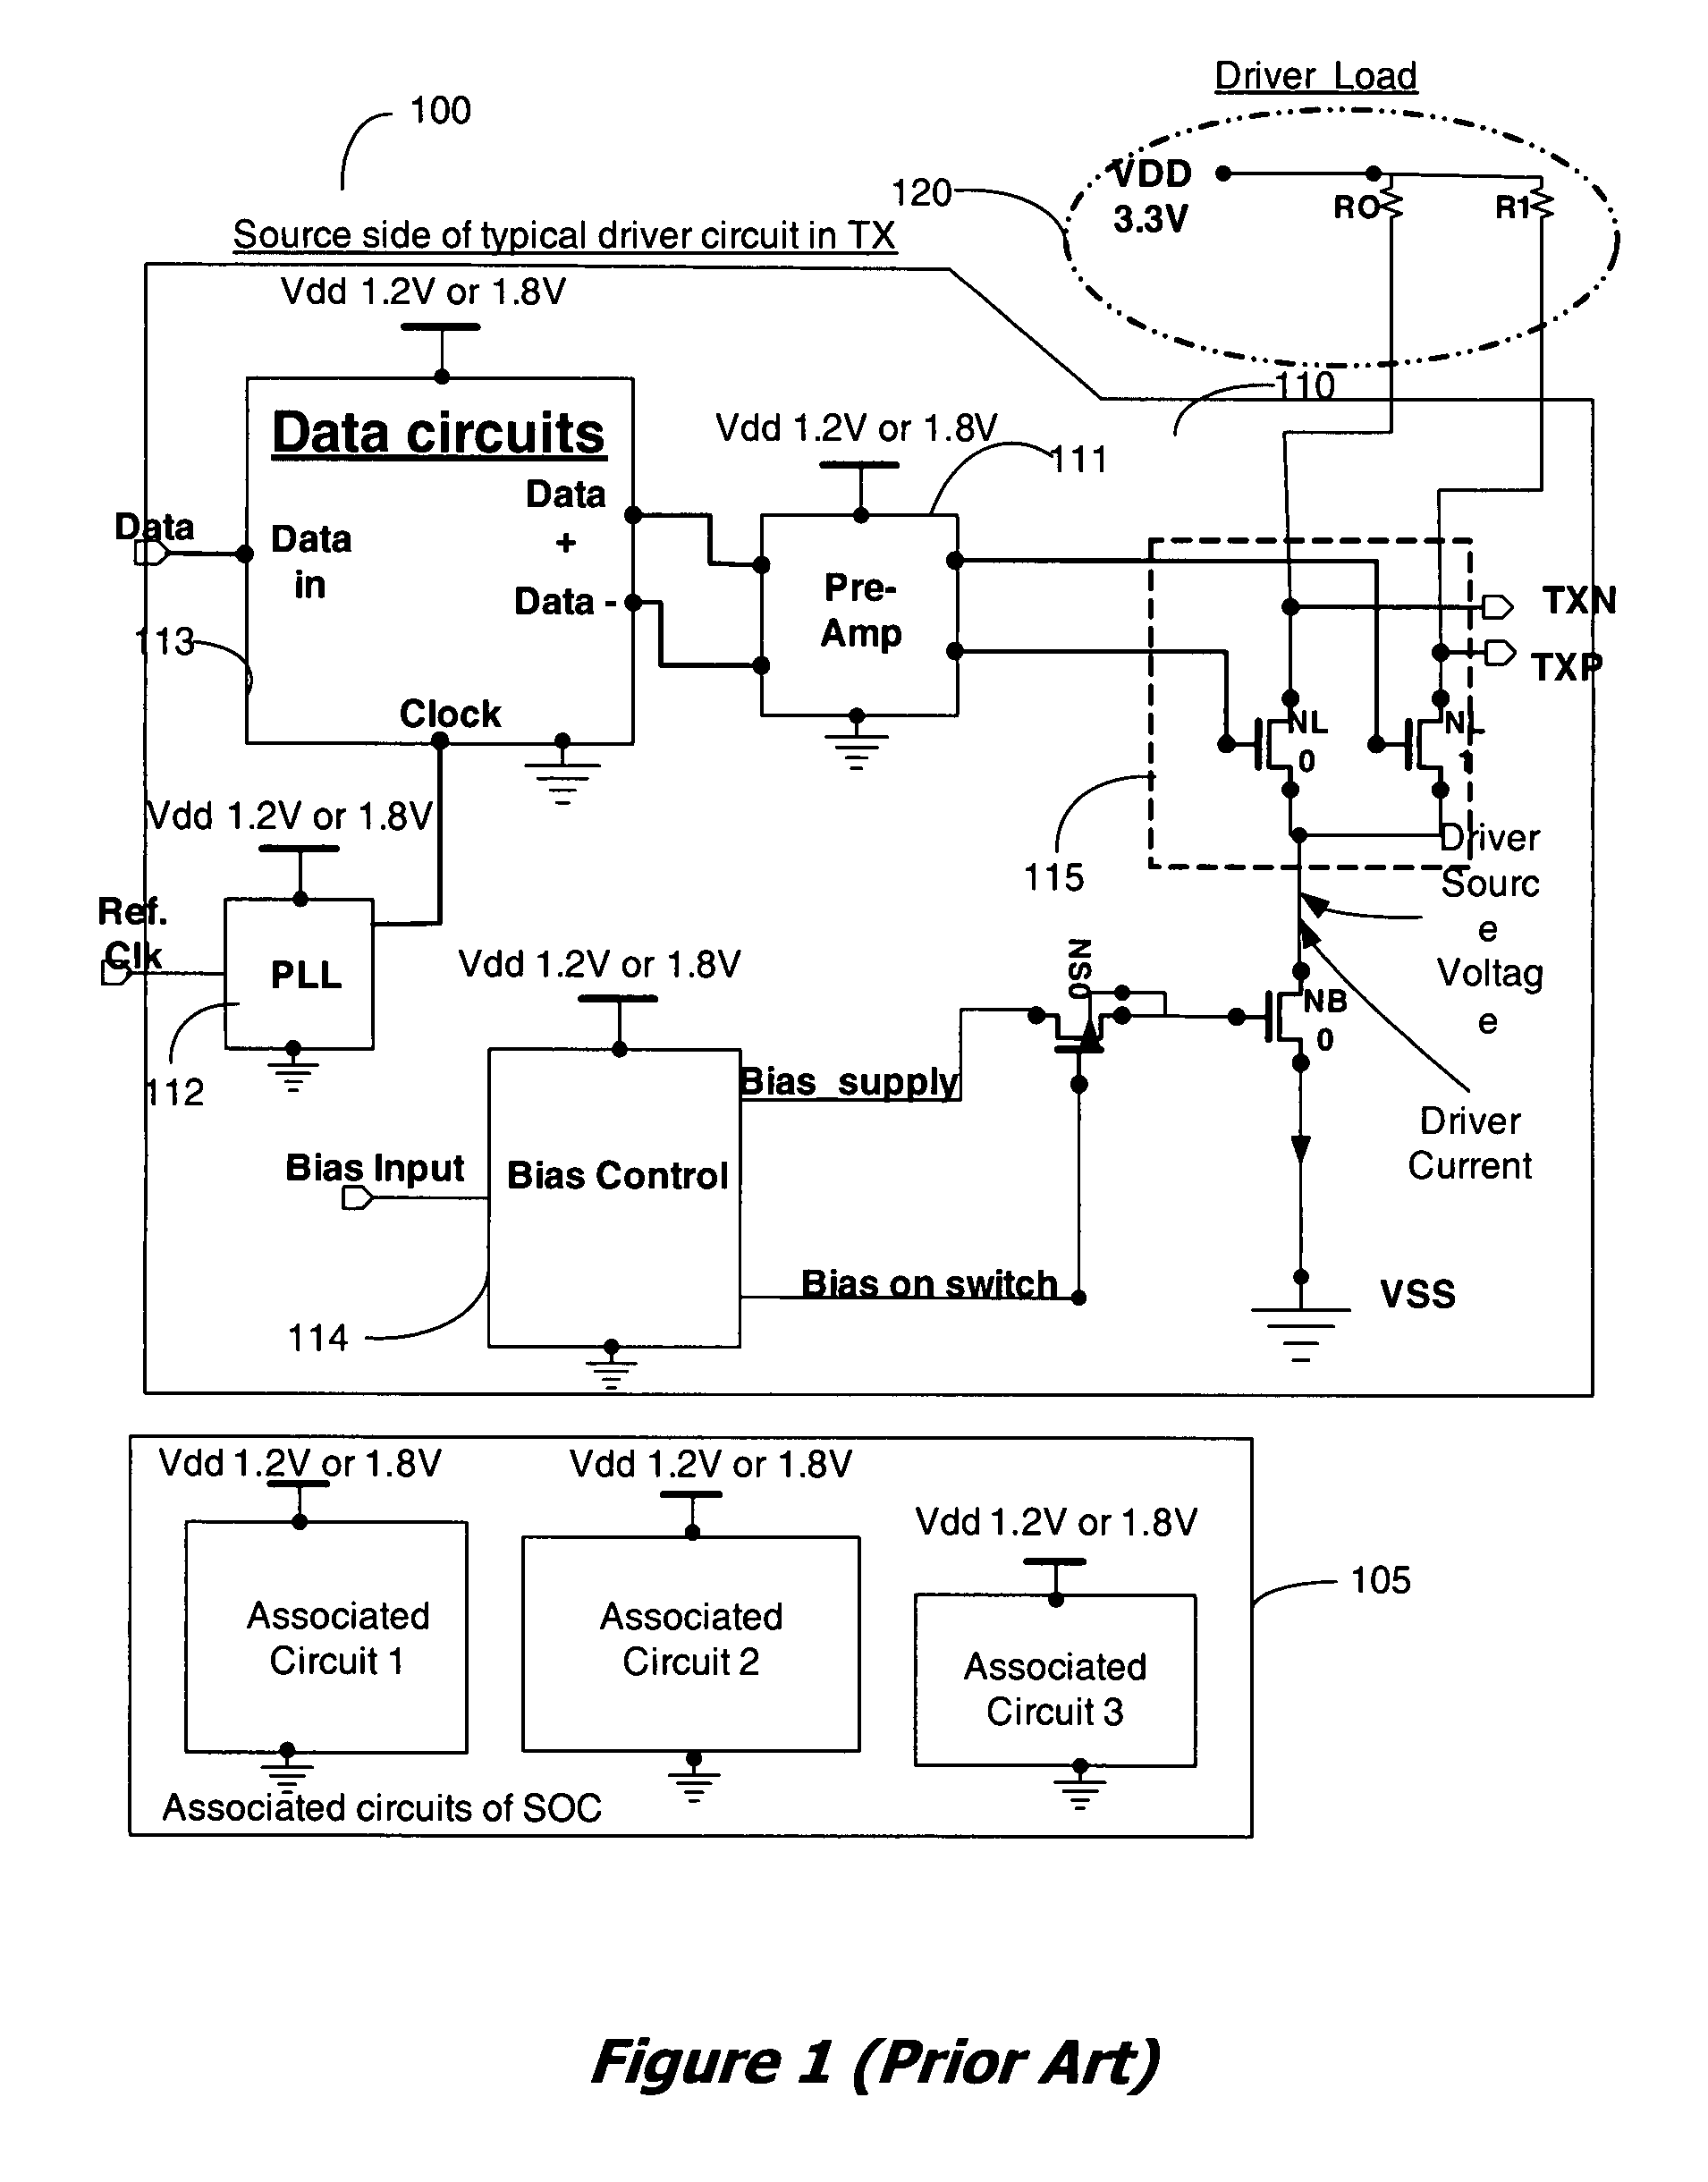 Apparatus and method for recovery of wasted power from differential drivers